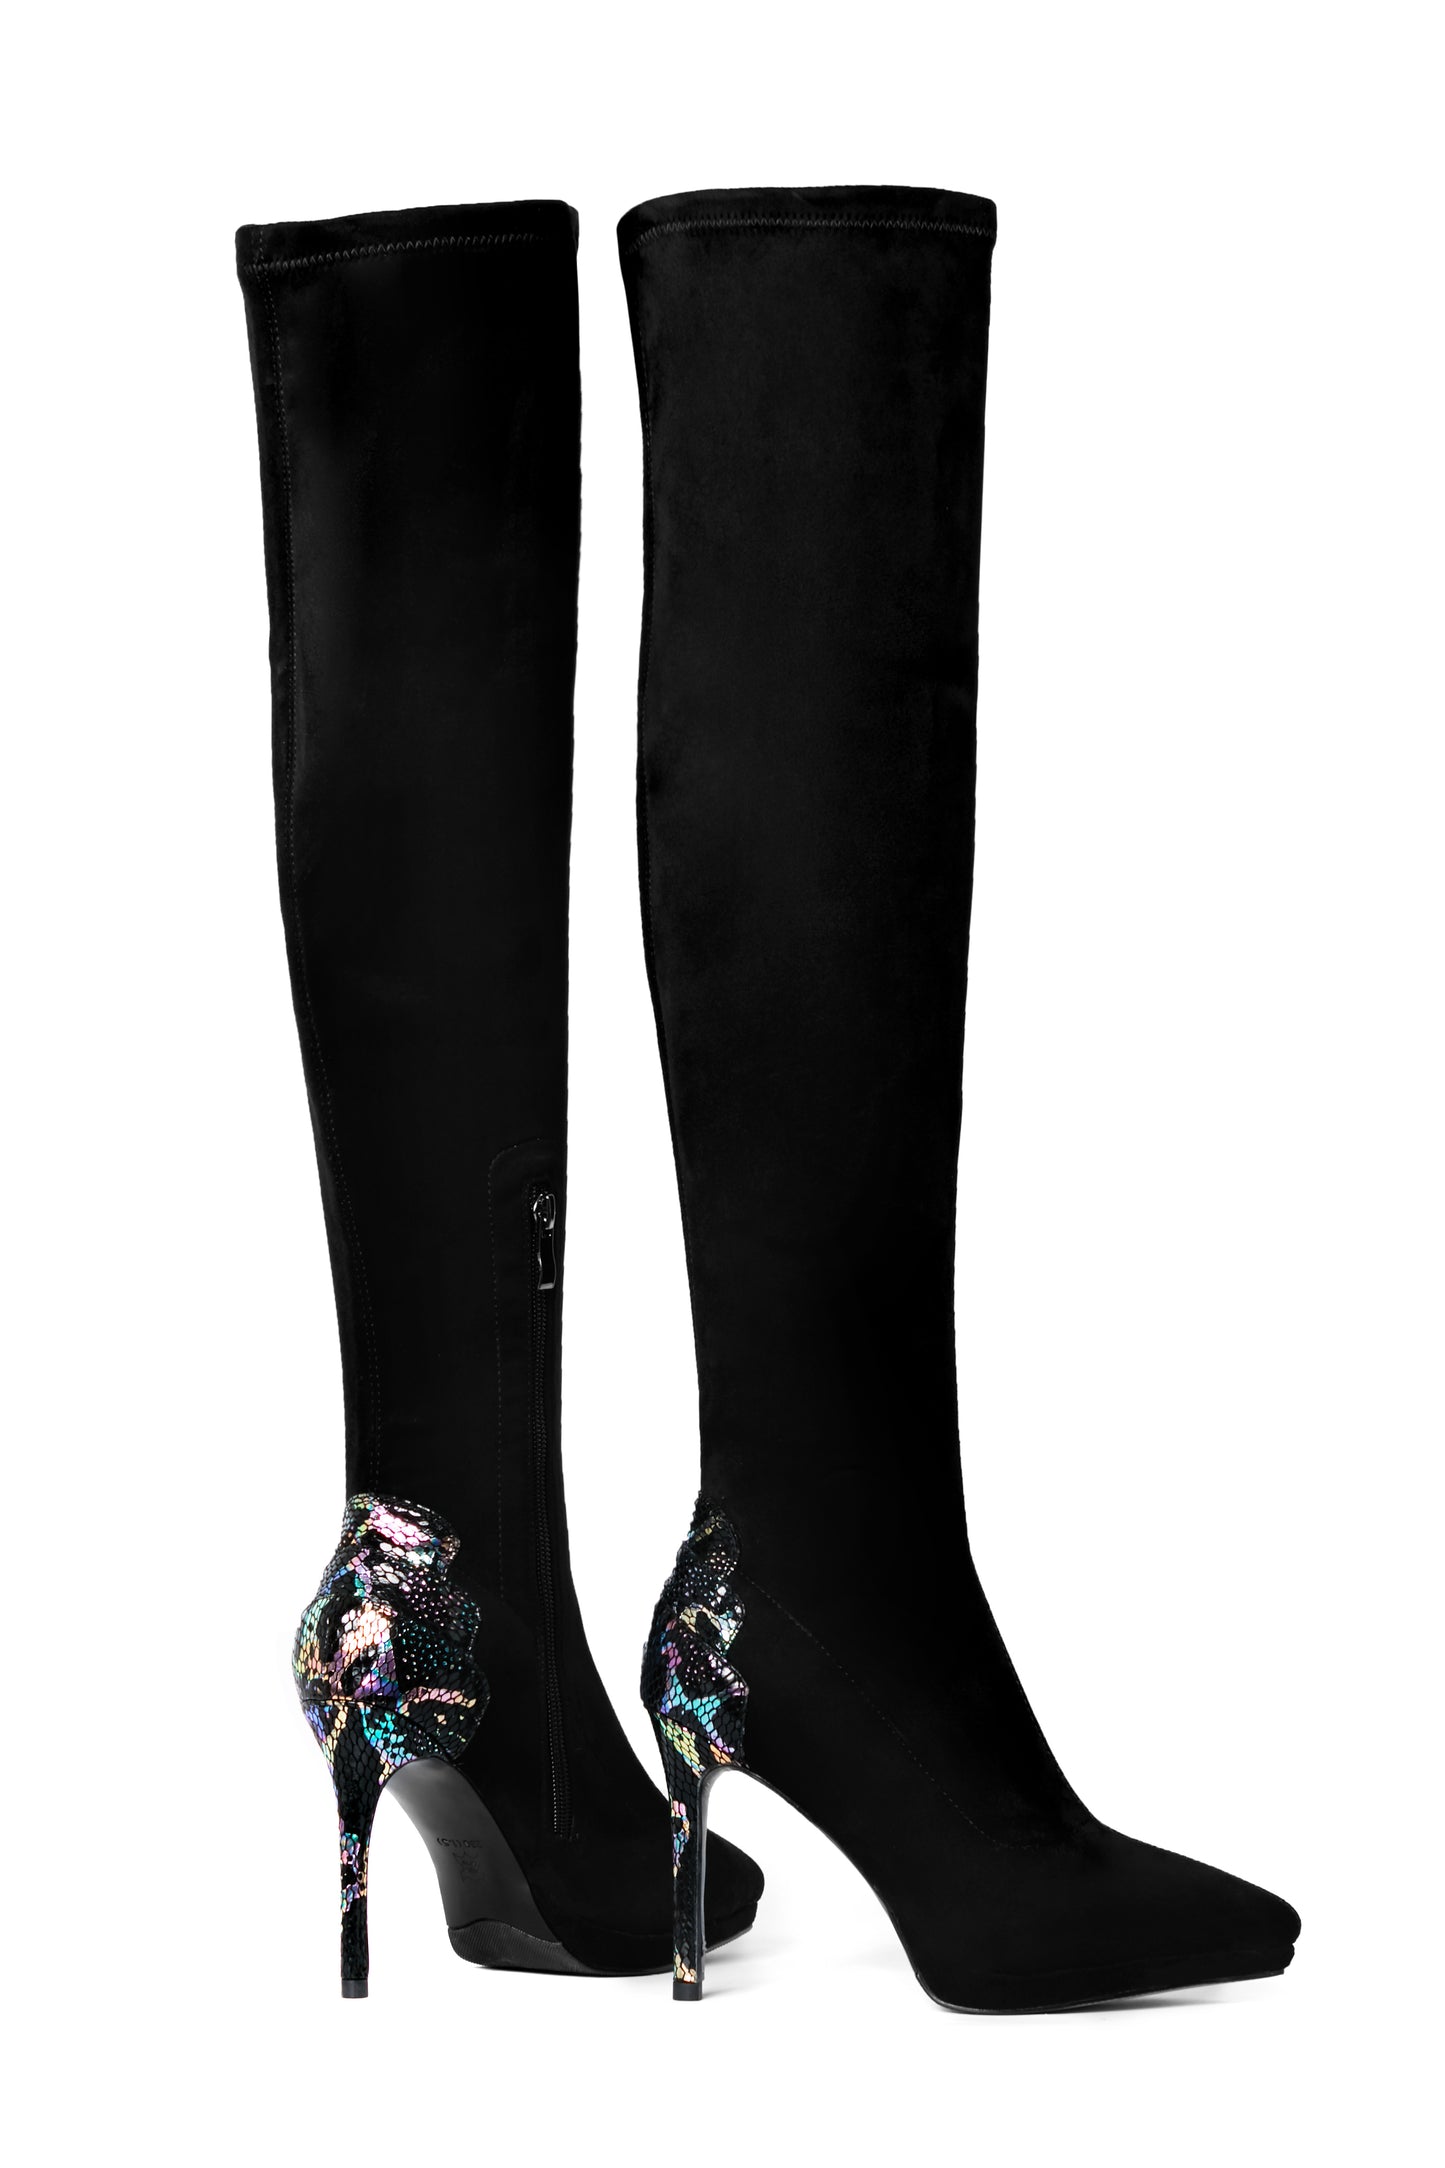 TinaCus Women's Handmade Suede Leather Pointed Toe Sexy Stiletto High Heel Stretch Half Zip Black Over the Knee High Boots with Colorful Sequin